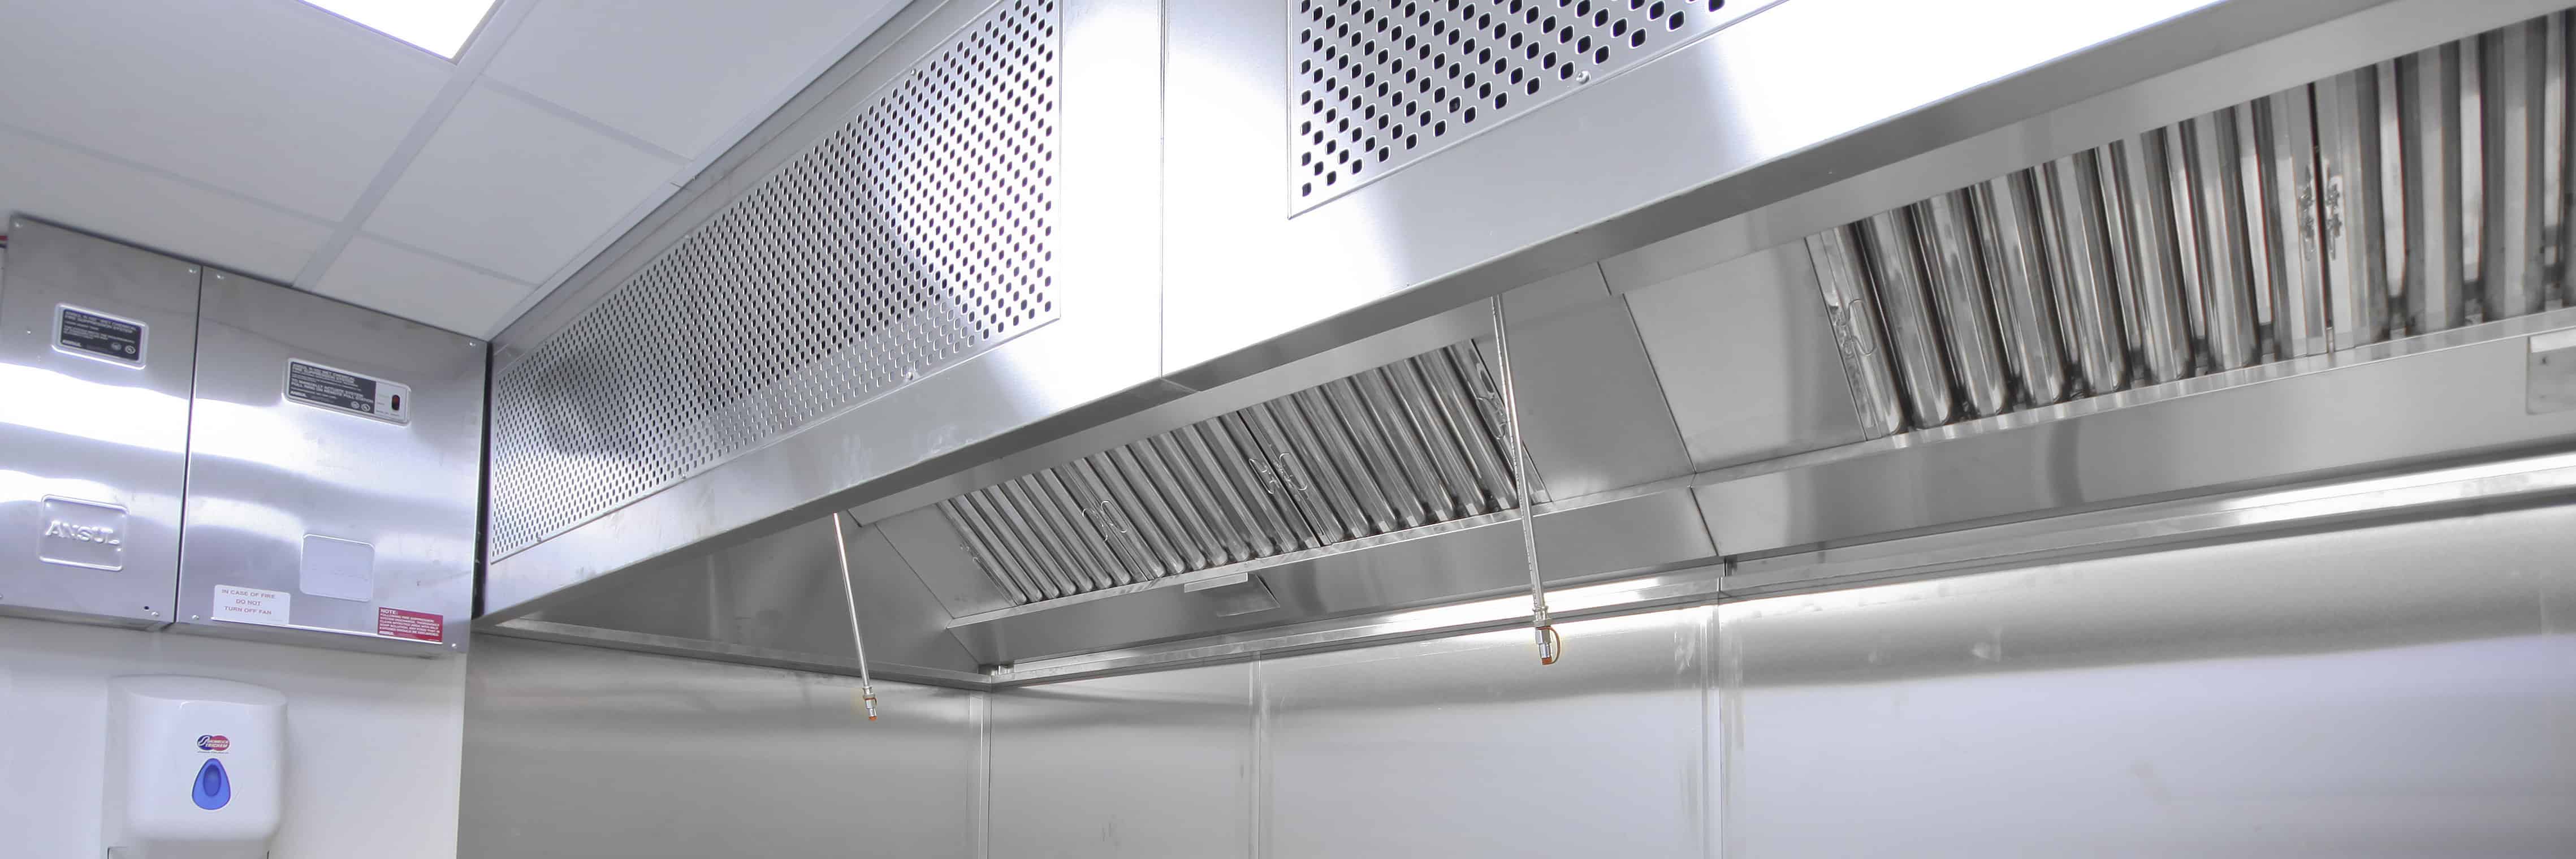 stainless steel canopy hood